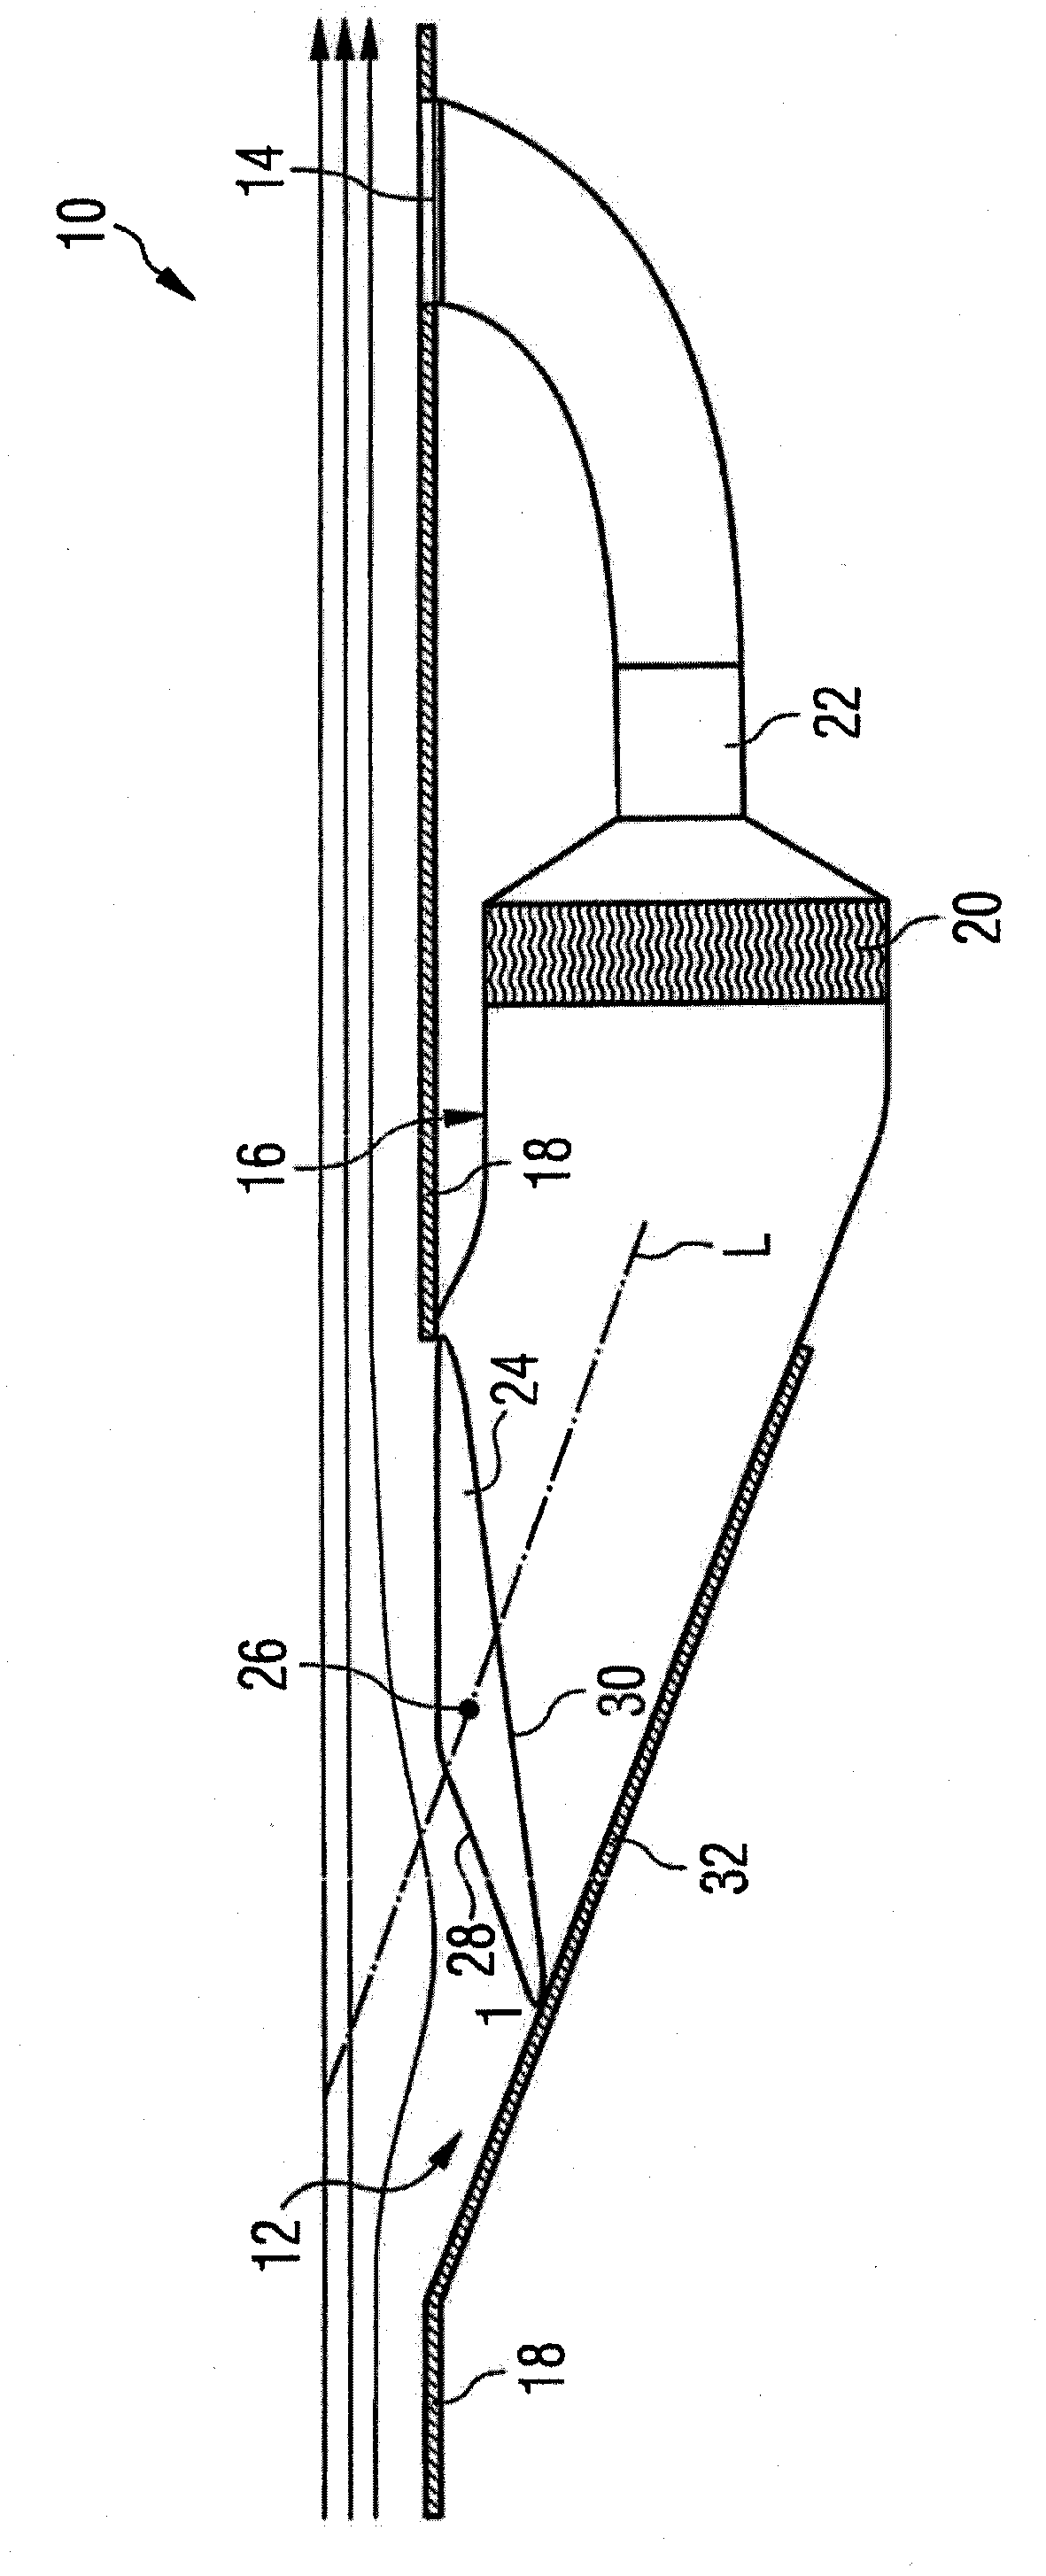 Air duct for supplying ambient air in an aircraft